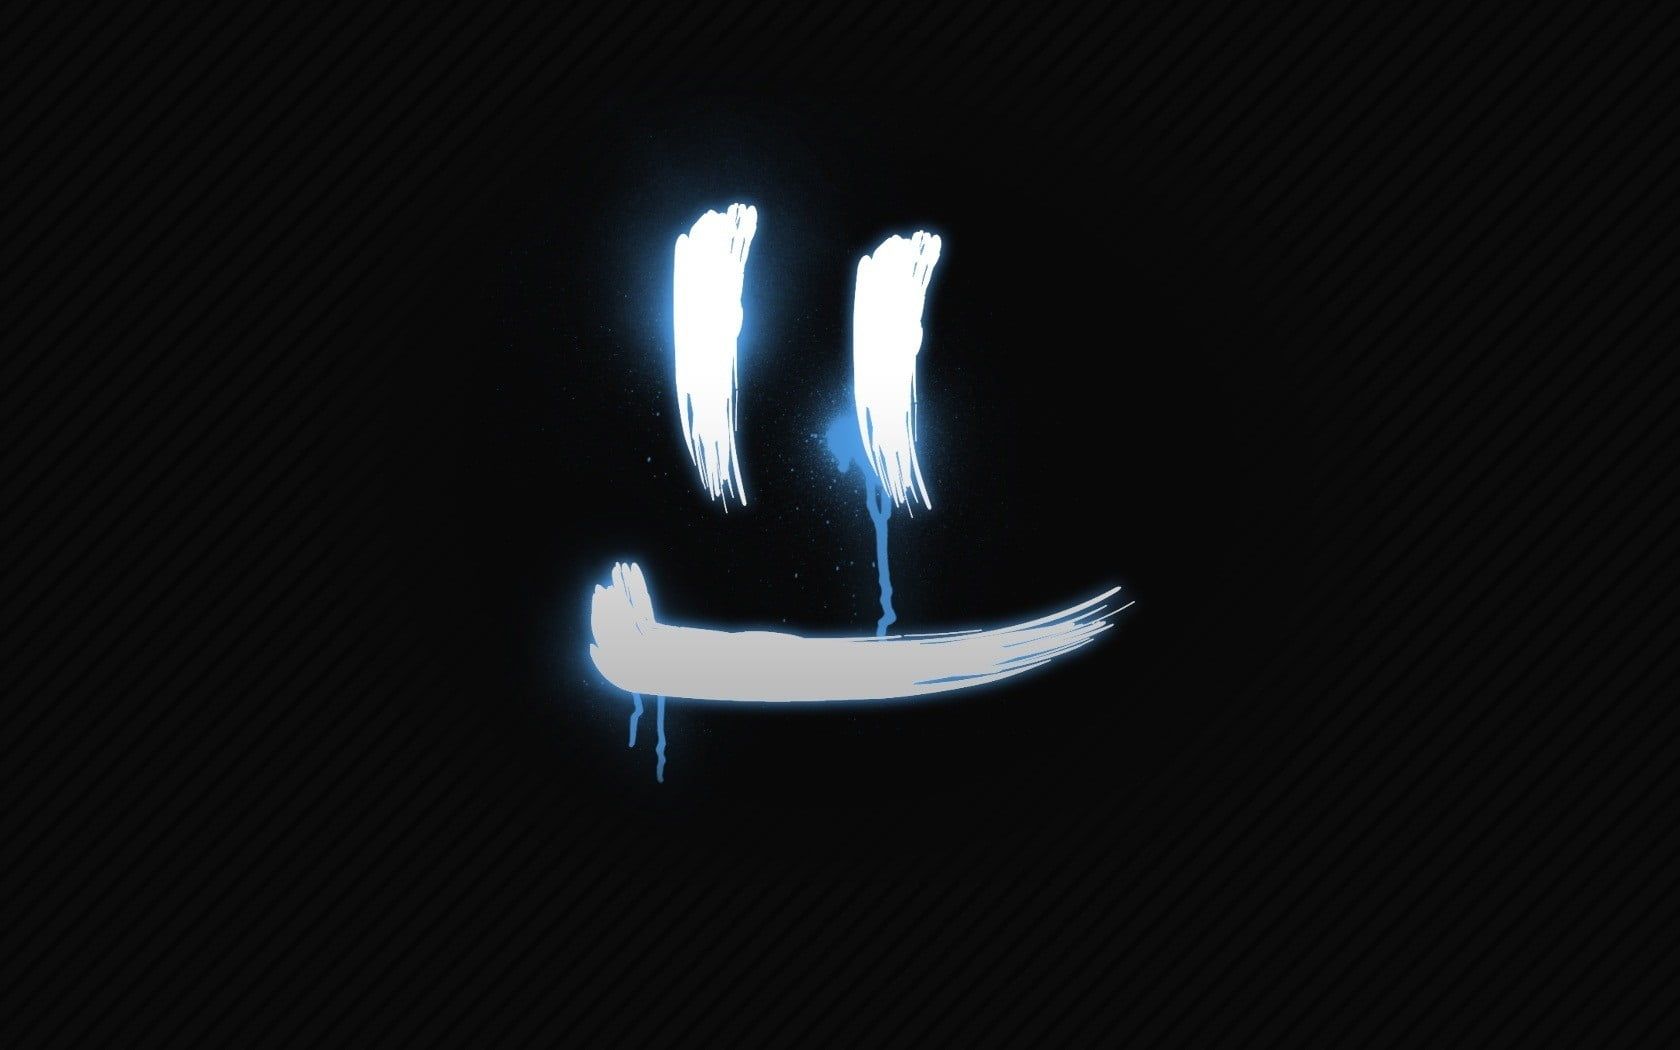 A smiley face made out of light on a black background - Emoji